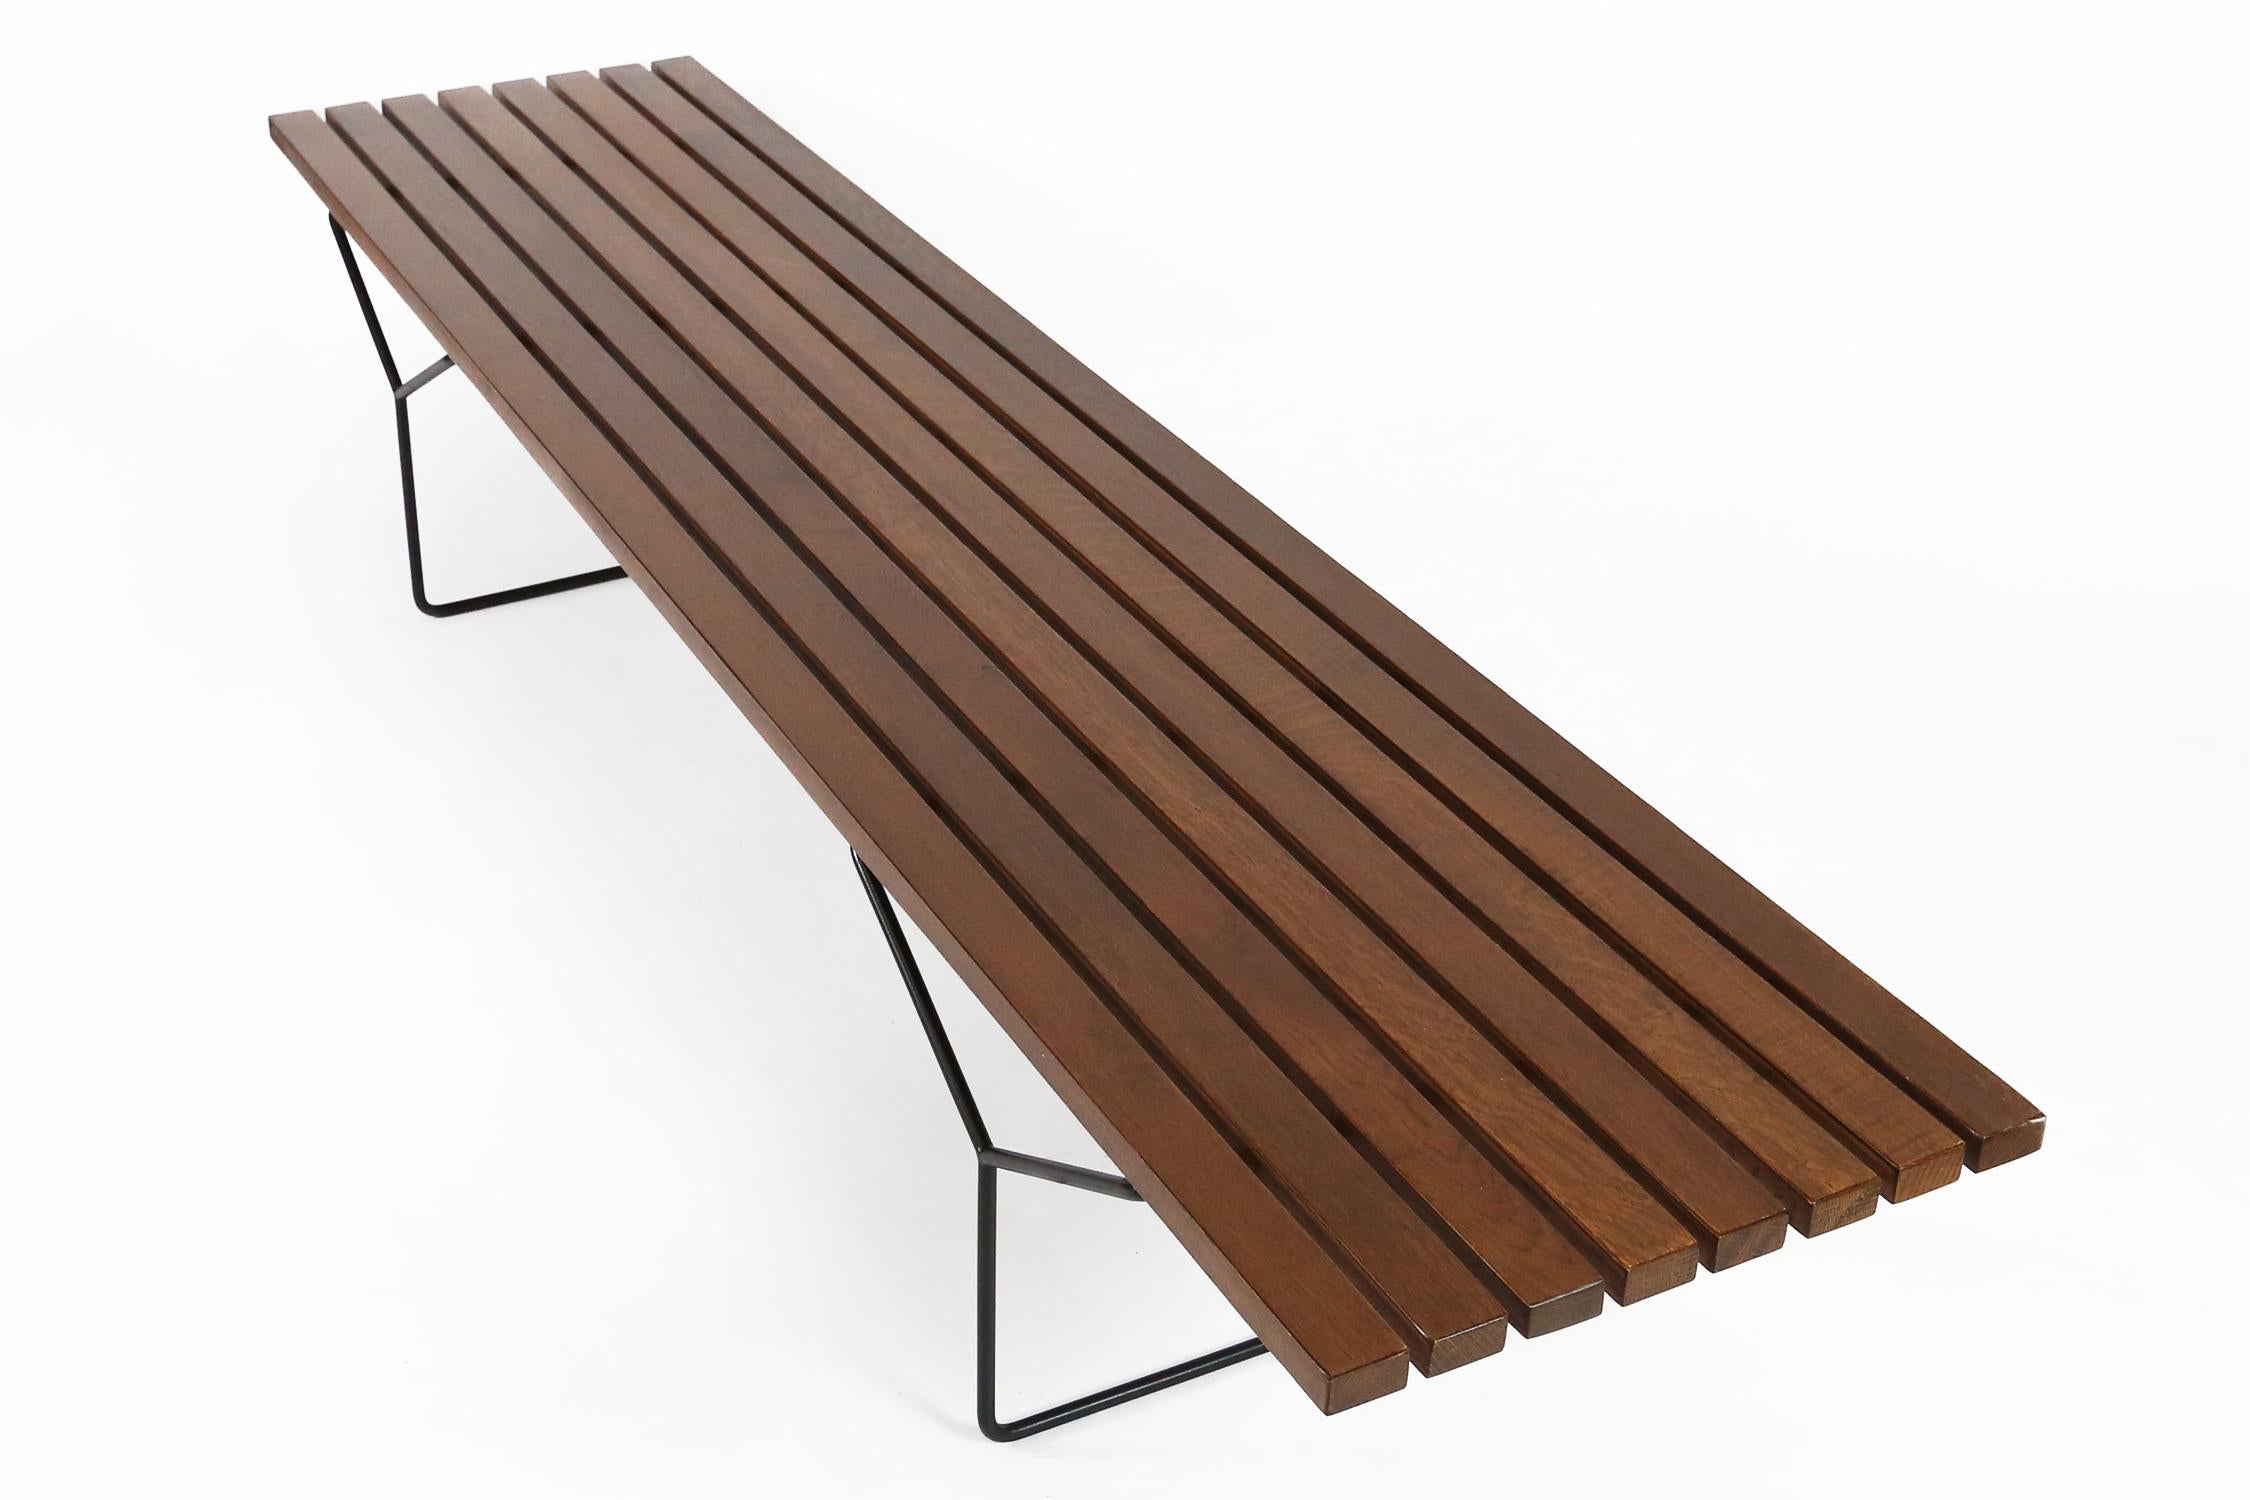 A great pair of early Harry Bertoia designed wood slat benches for Knoll International, made in Belgium by De Coene under license of Knoll International. The wood slats been refinished on both benches and they still have their original metal